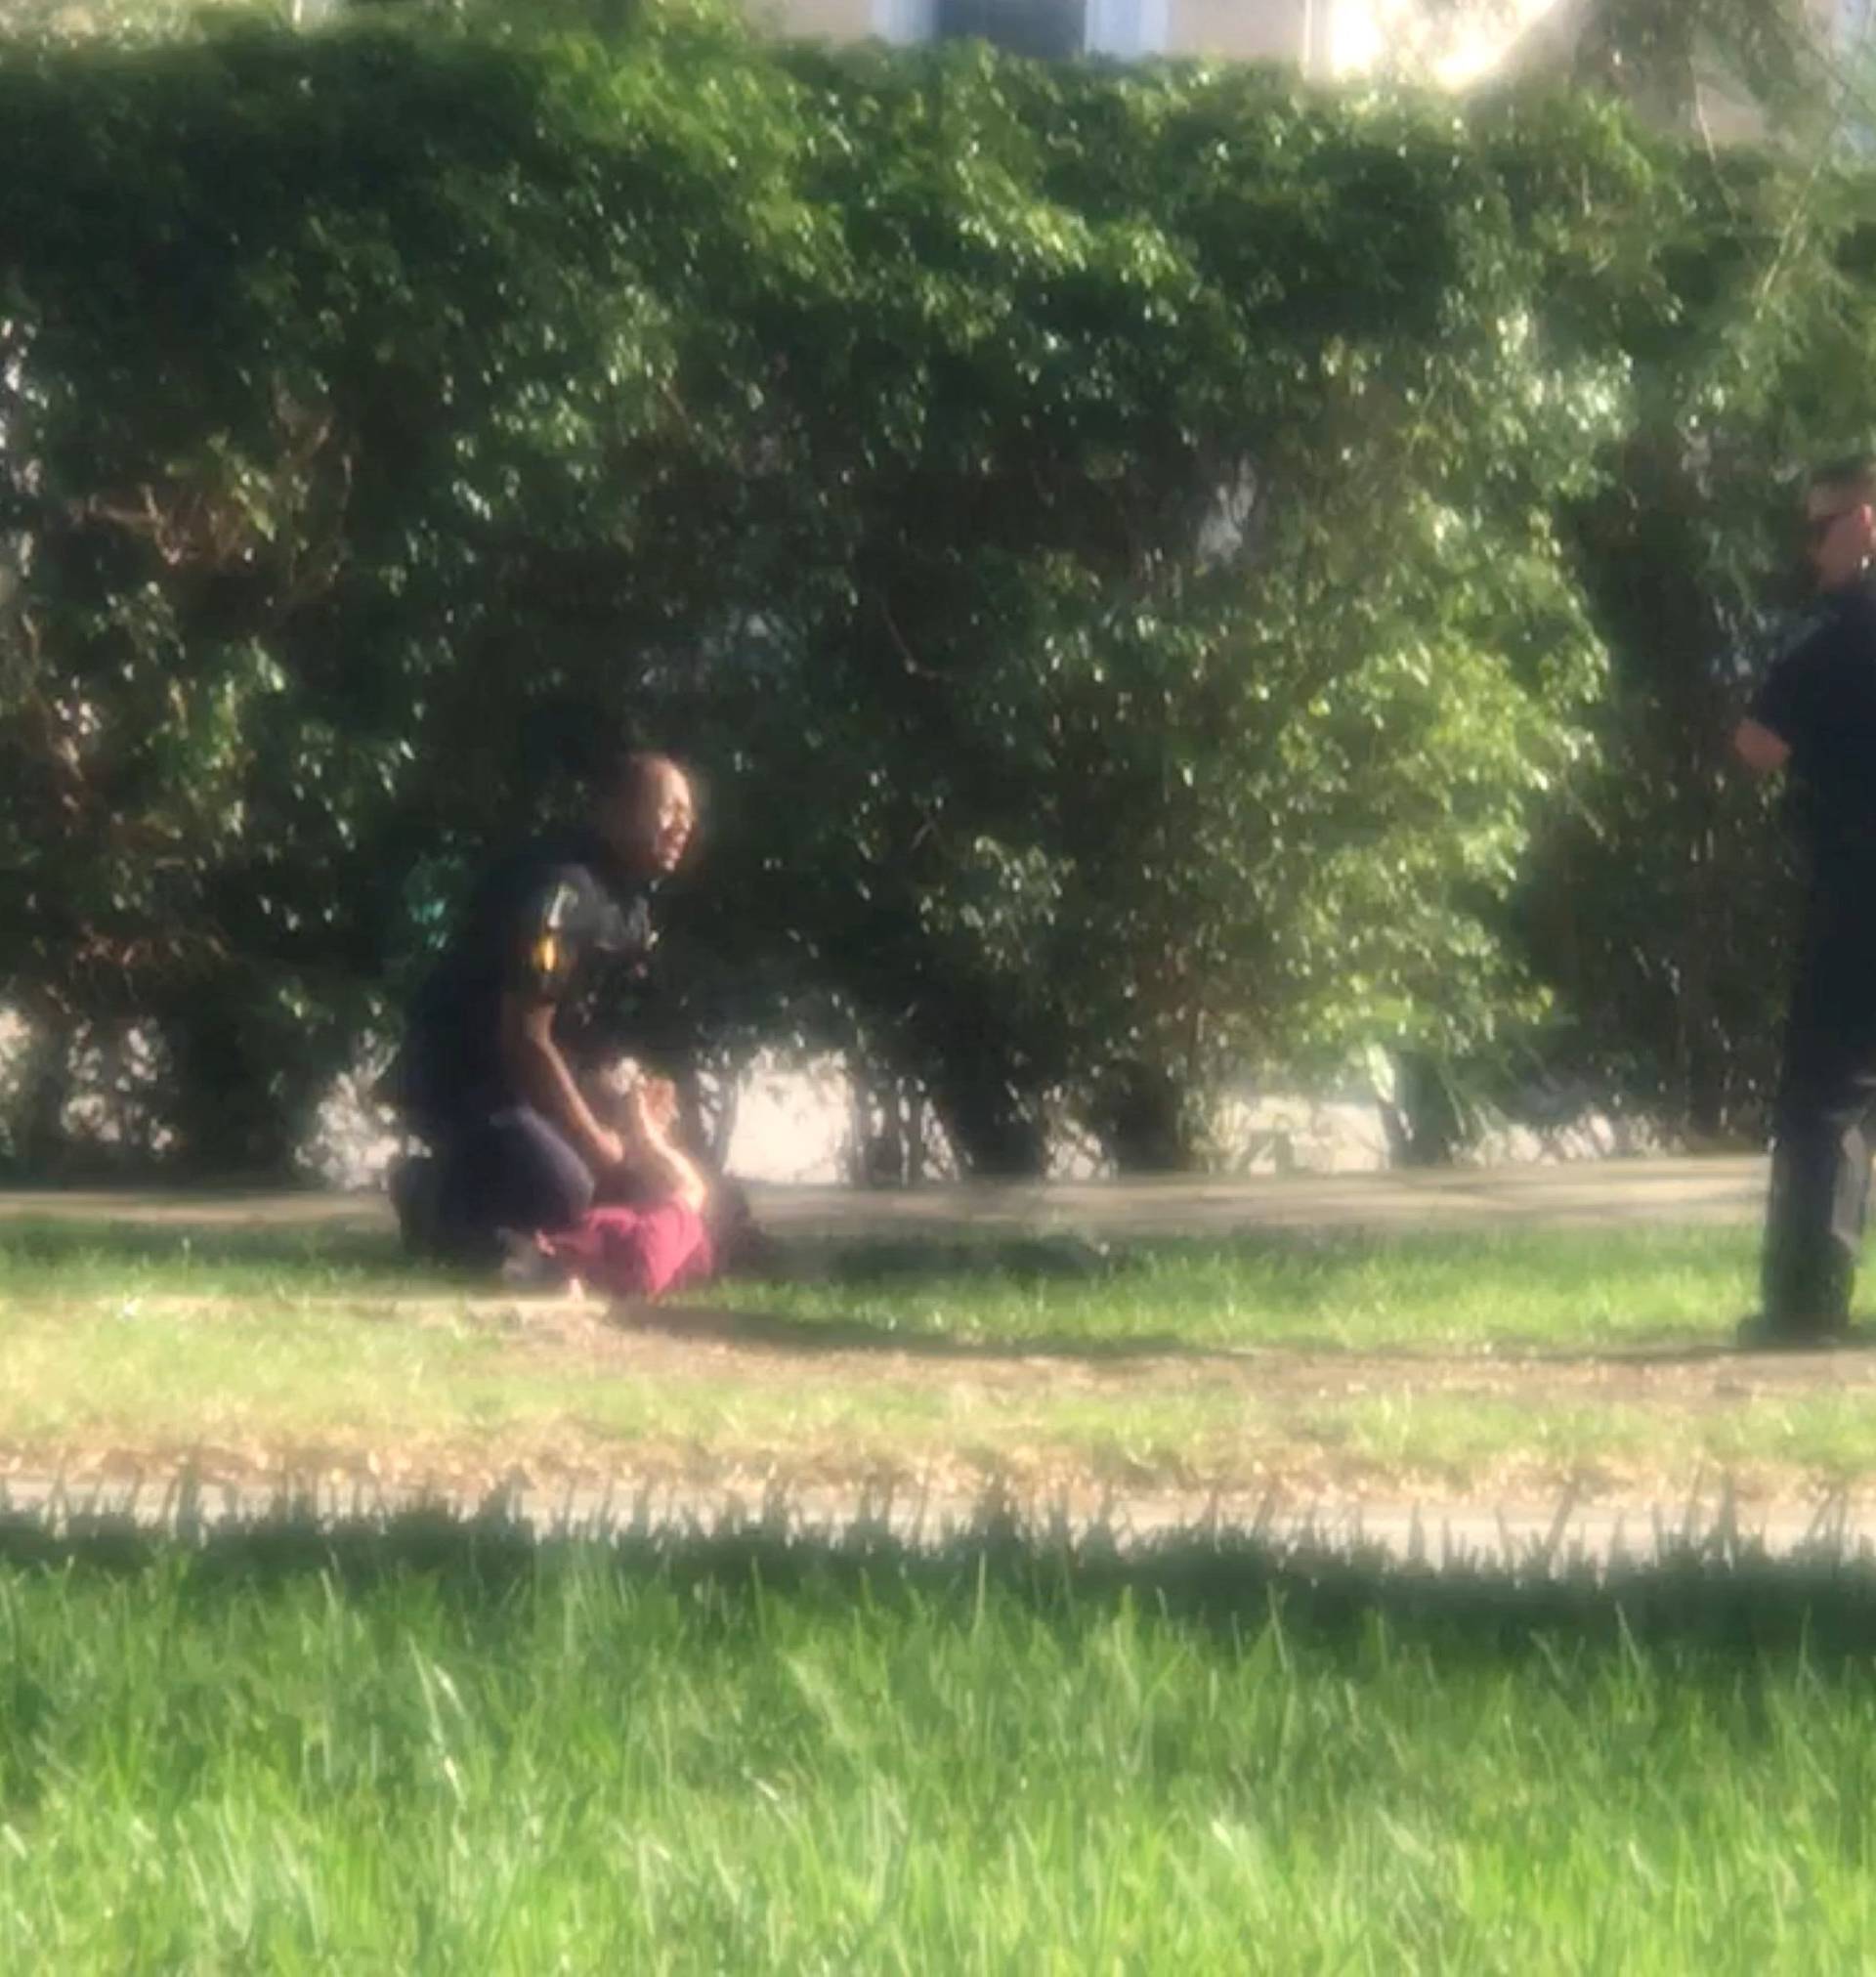 A man is placed in handcuffs by police officer, following a shooting incident in Parkland